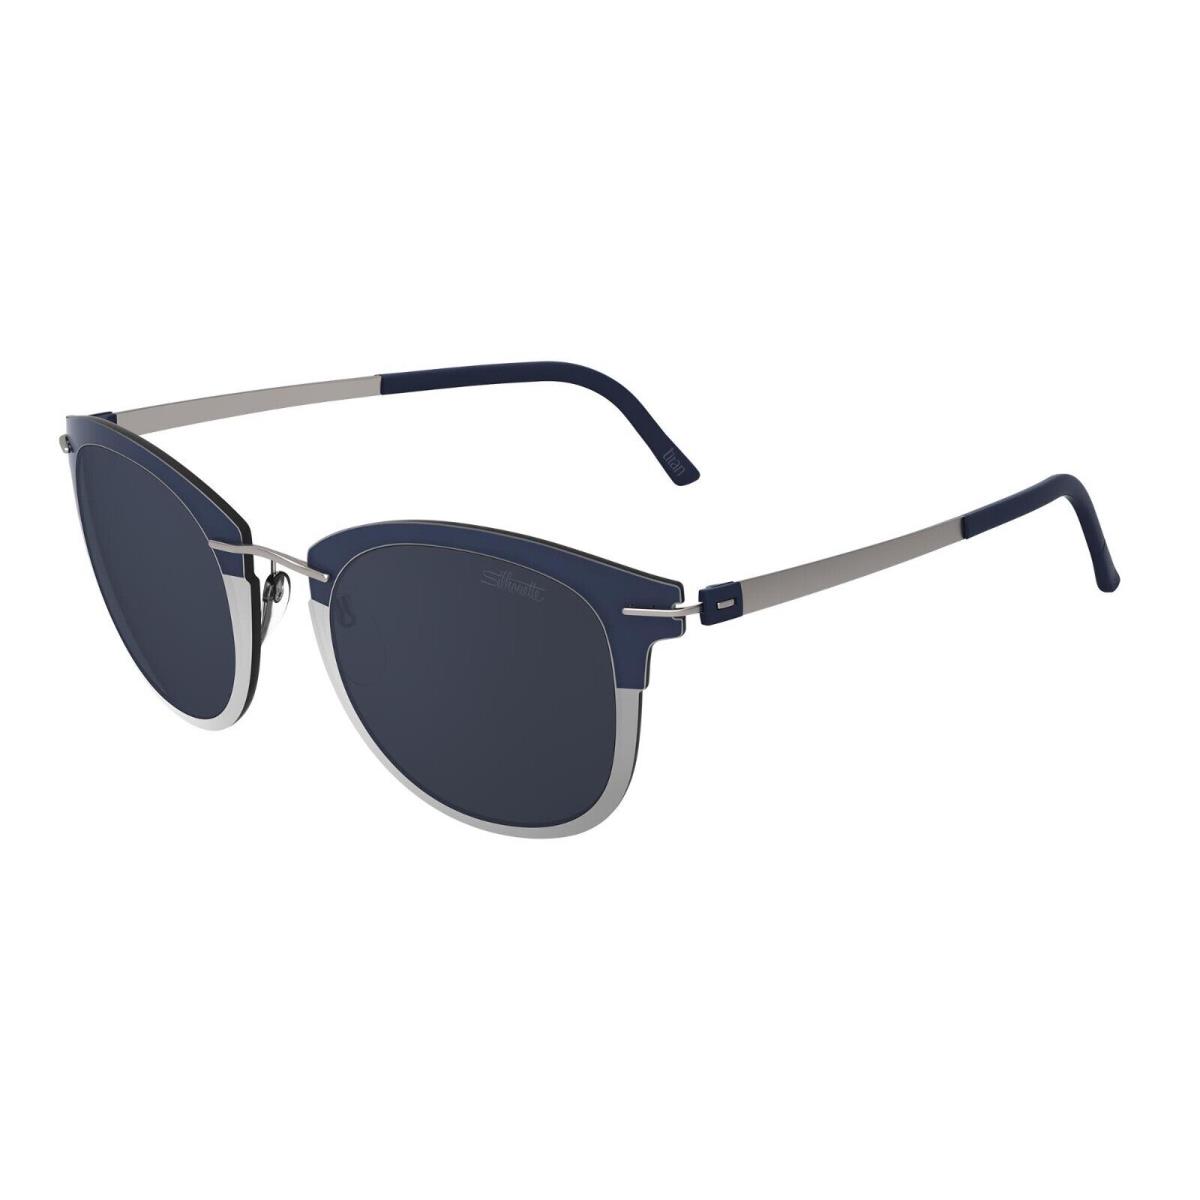 Silhouette Infinity Collection 8701 Silver and Blue/blue 7110 Sunglasses